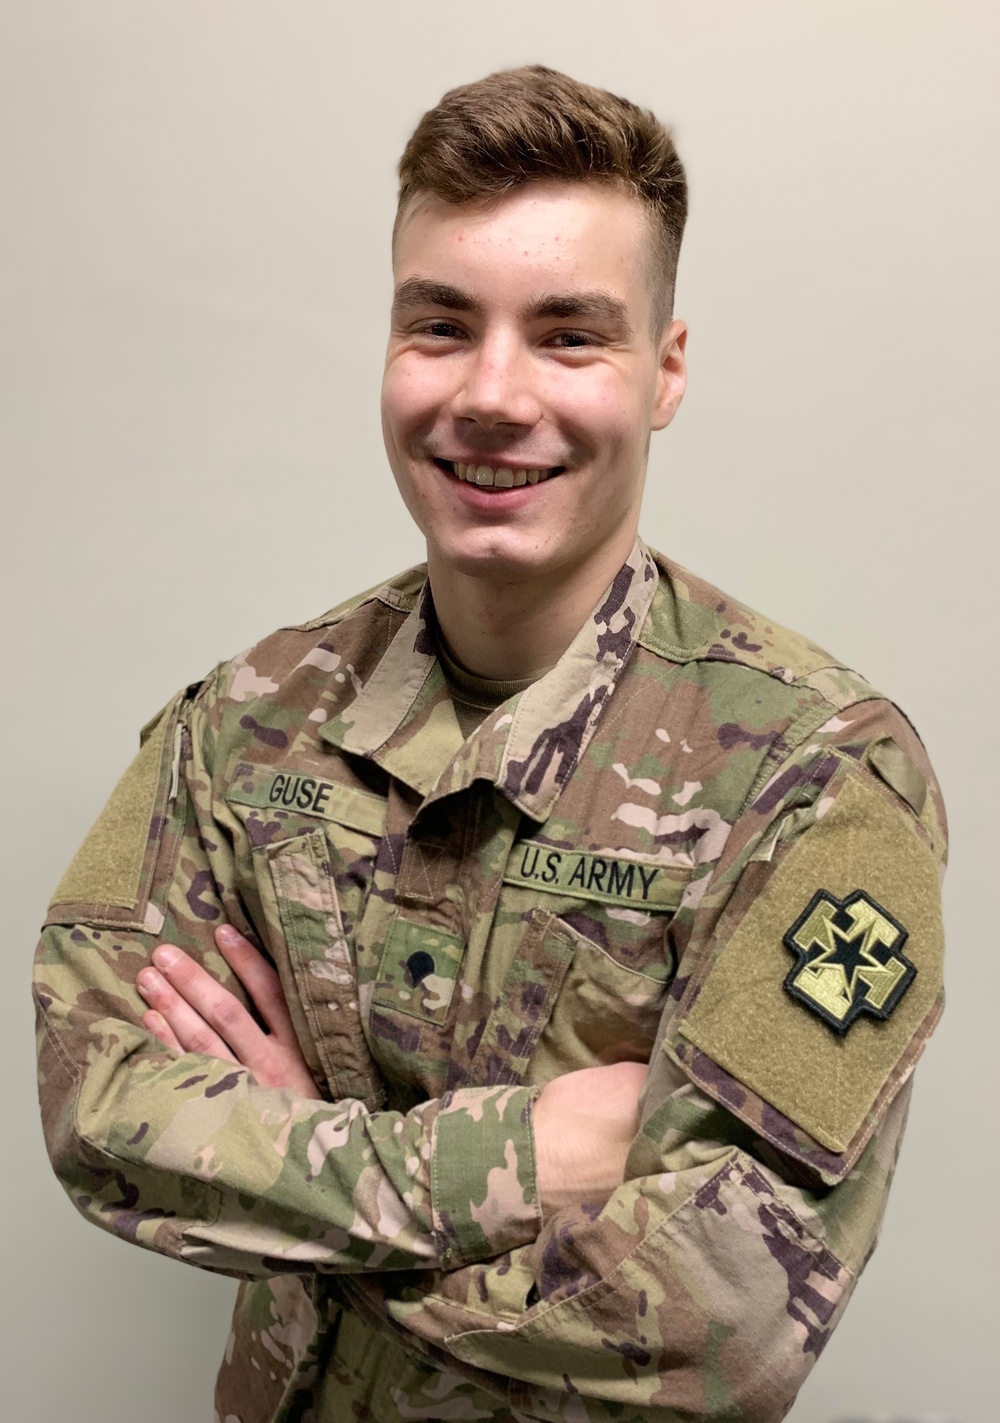 Spc. Phillip Guse (Competitor: USARCENT Best Warrior Competition 2021)